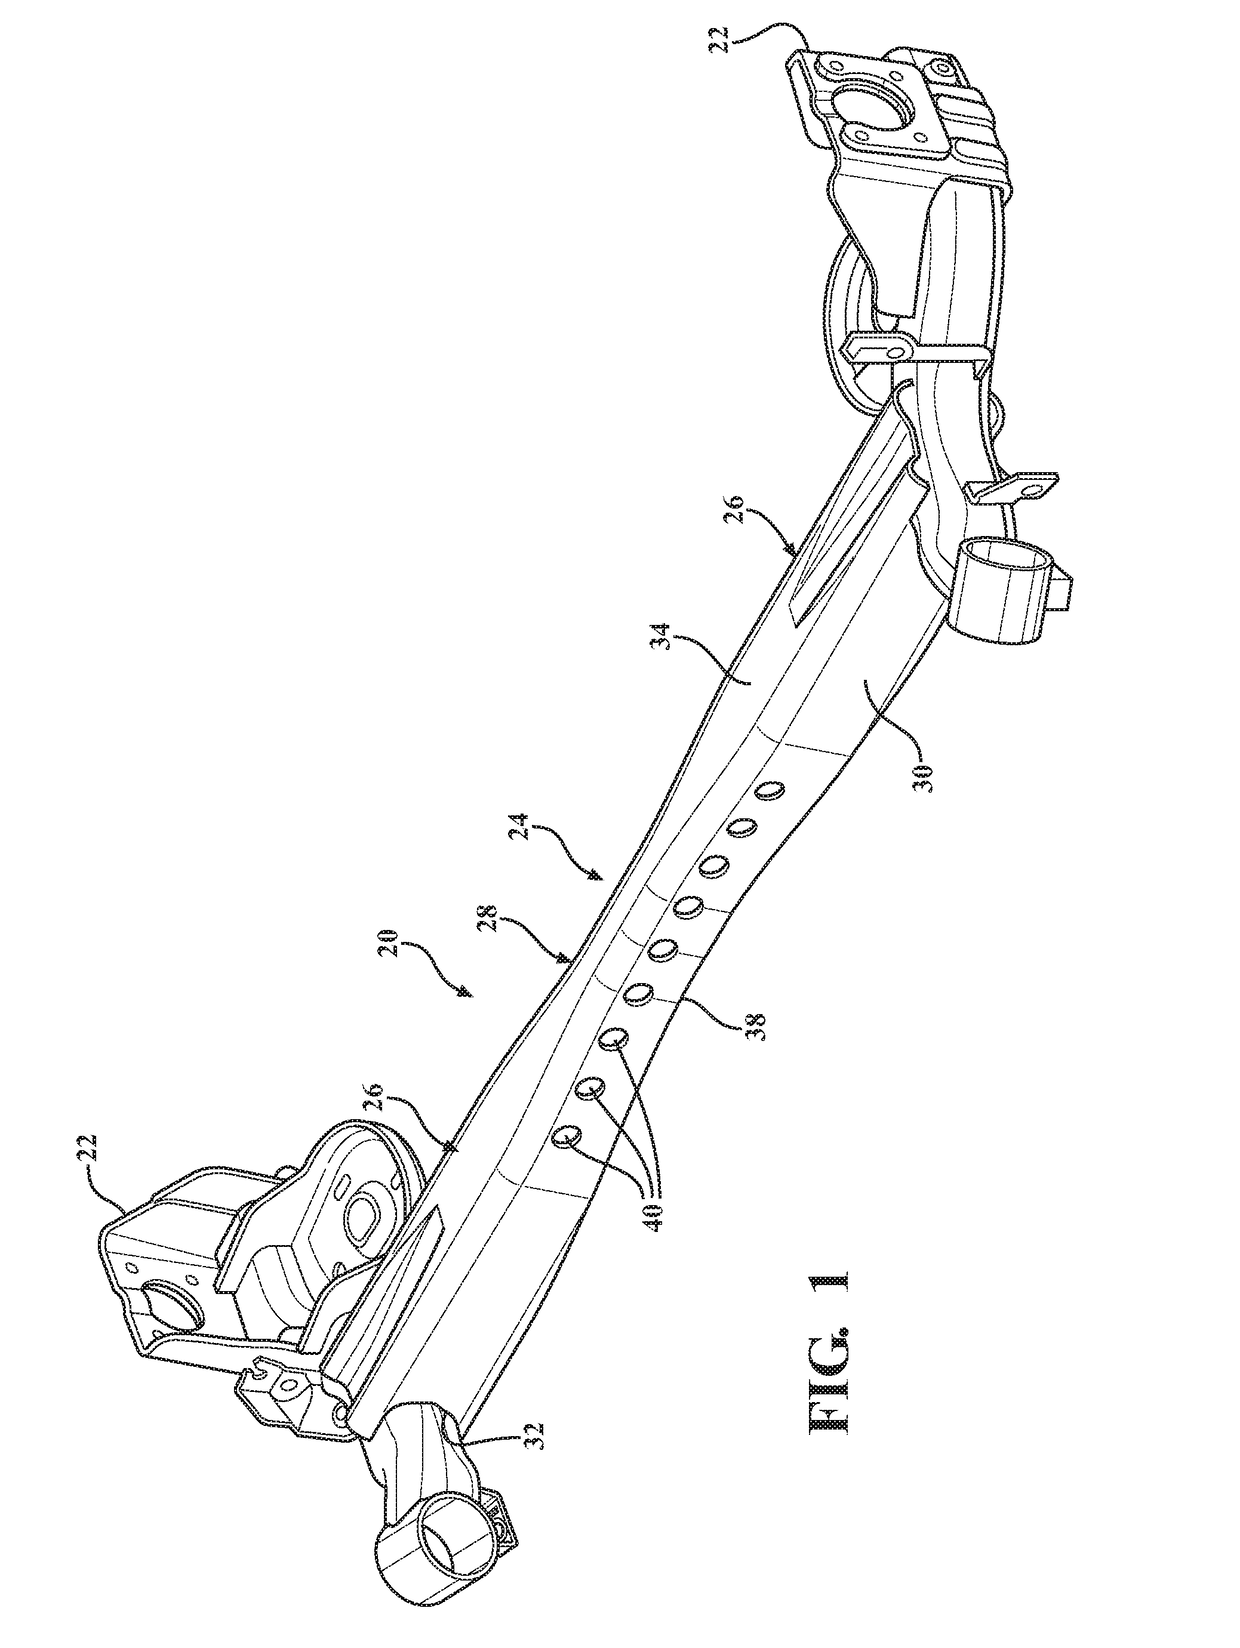 Vehicle twist axle assembly